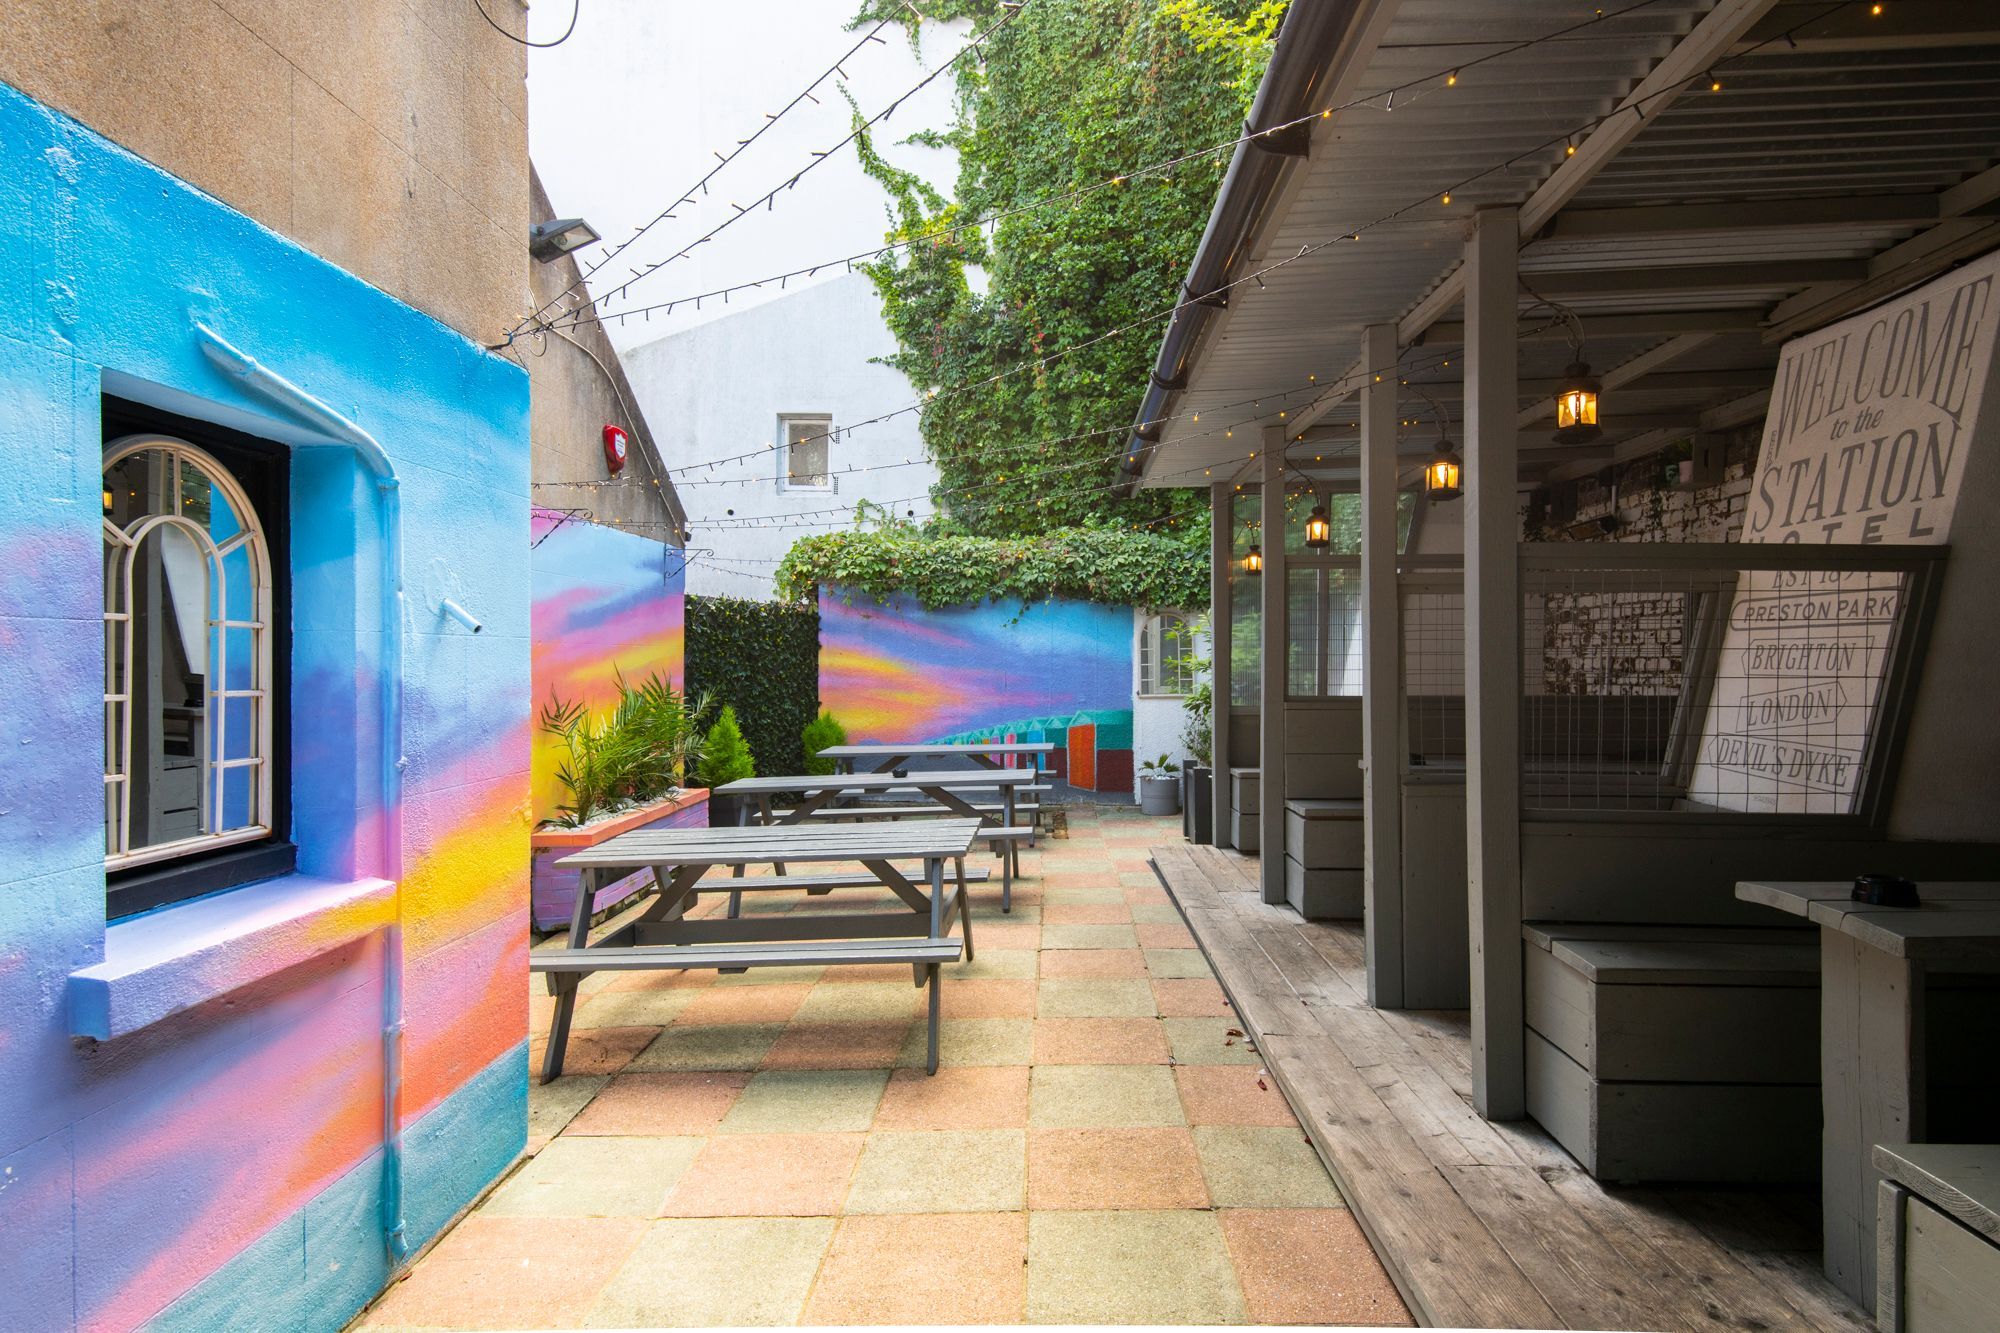 courtyard with colorful painted walls and private area with wooden benches